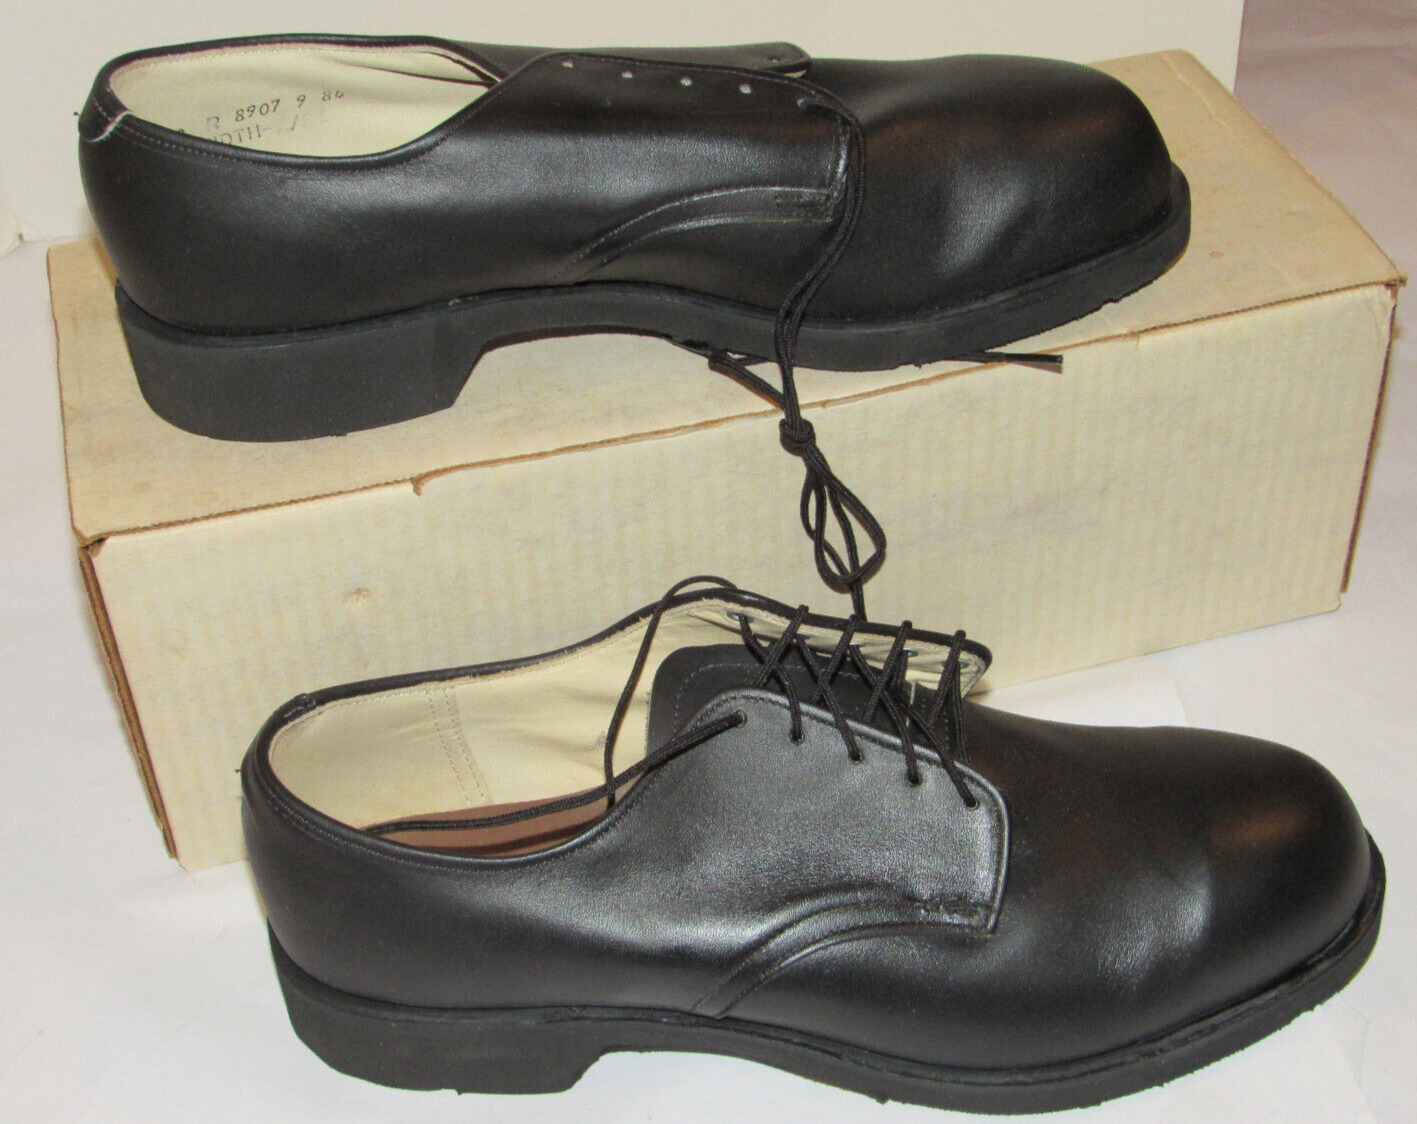 UNUSED 1980s US MILITARY BLACK LEATHER LOW QUARTER SAFETY SHOES LEAVENWORTH 10D